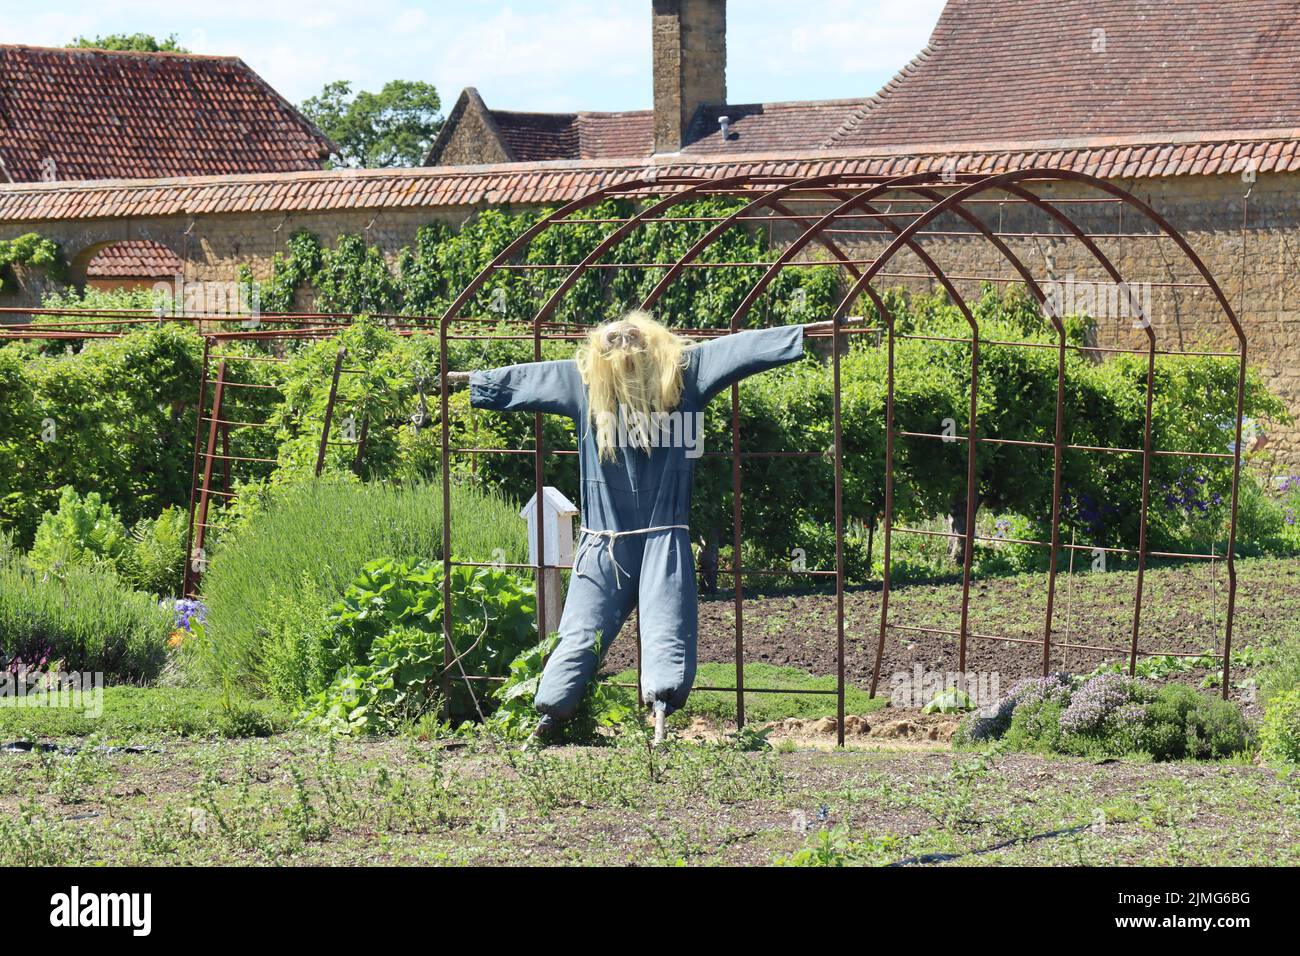 A scary looking scarecrow with long hair and dressed in blue dungarees in the kitchen garden of an old English country manor house Stock Photo